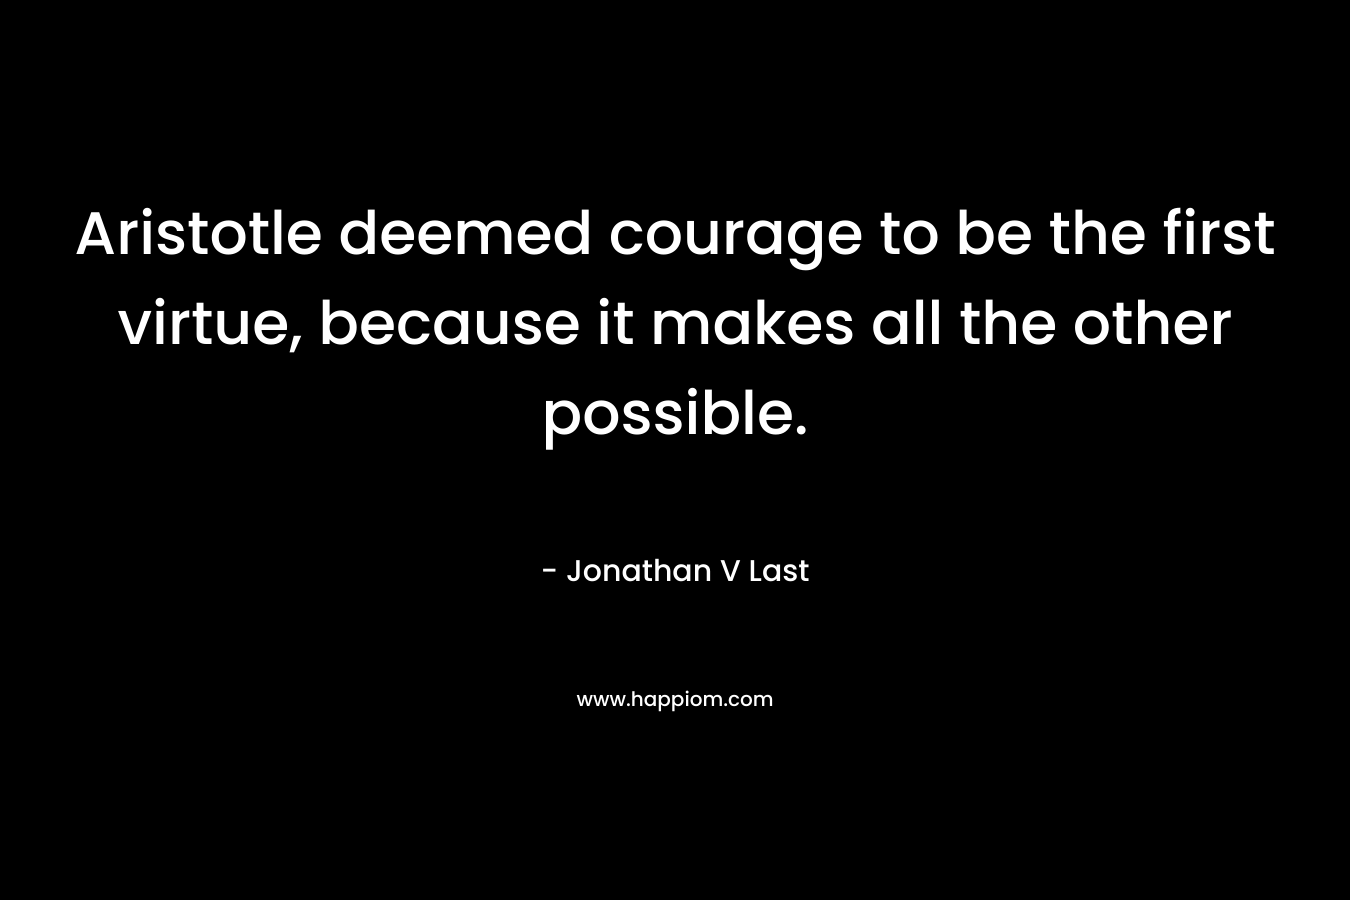 Aristotle deemed courage to be the first virtue, because it makes all the other possible. – Jonathan V Last